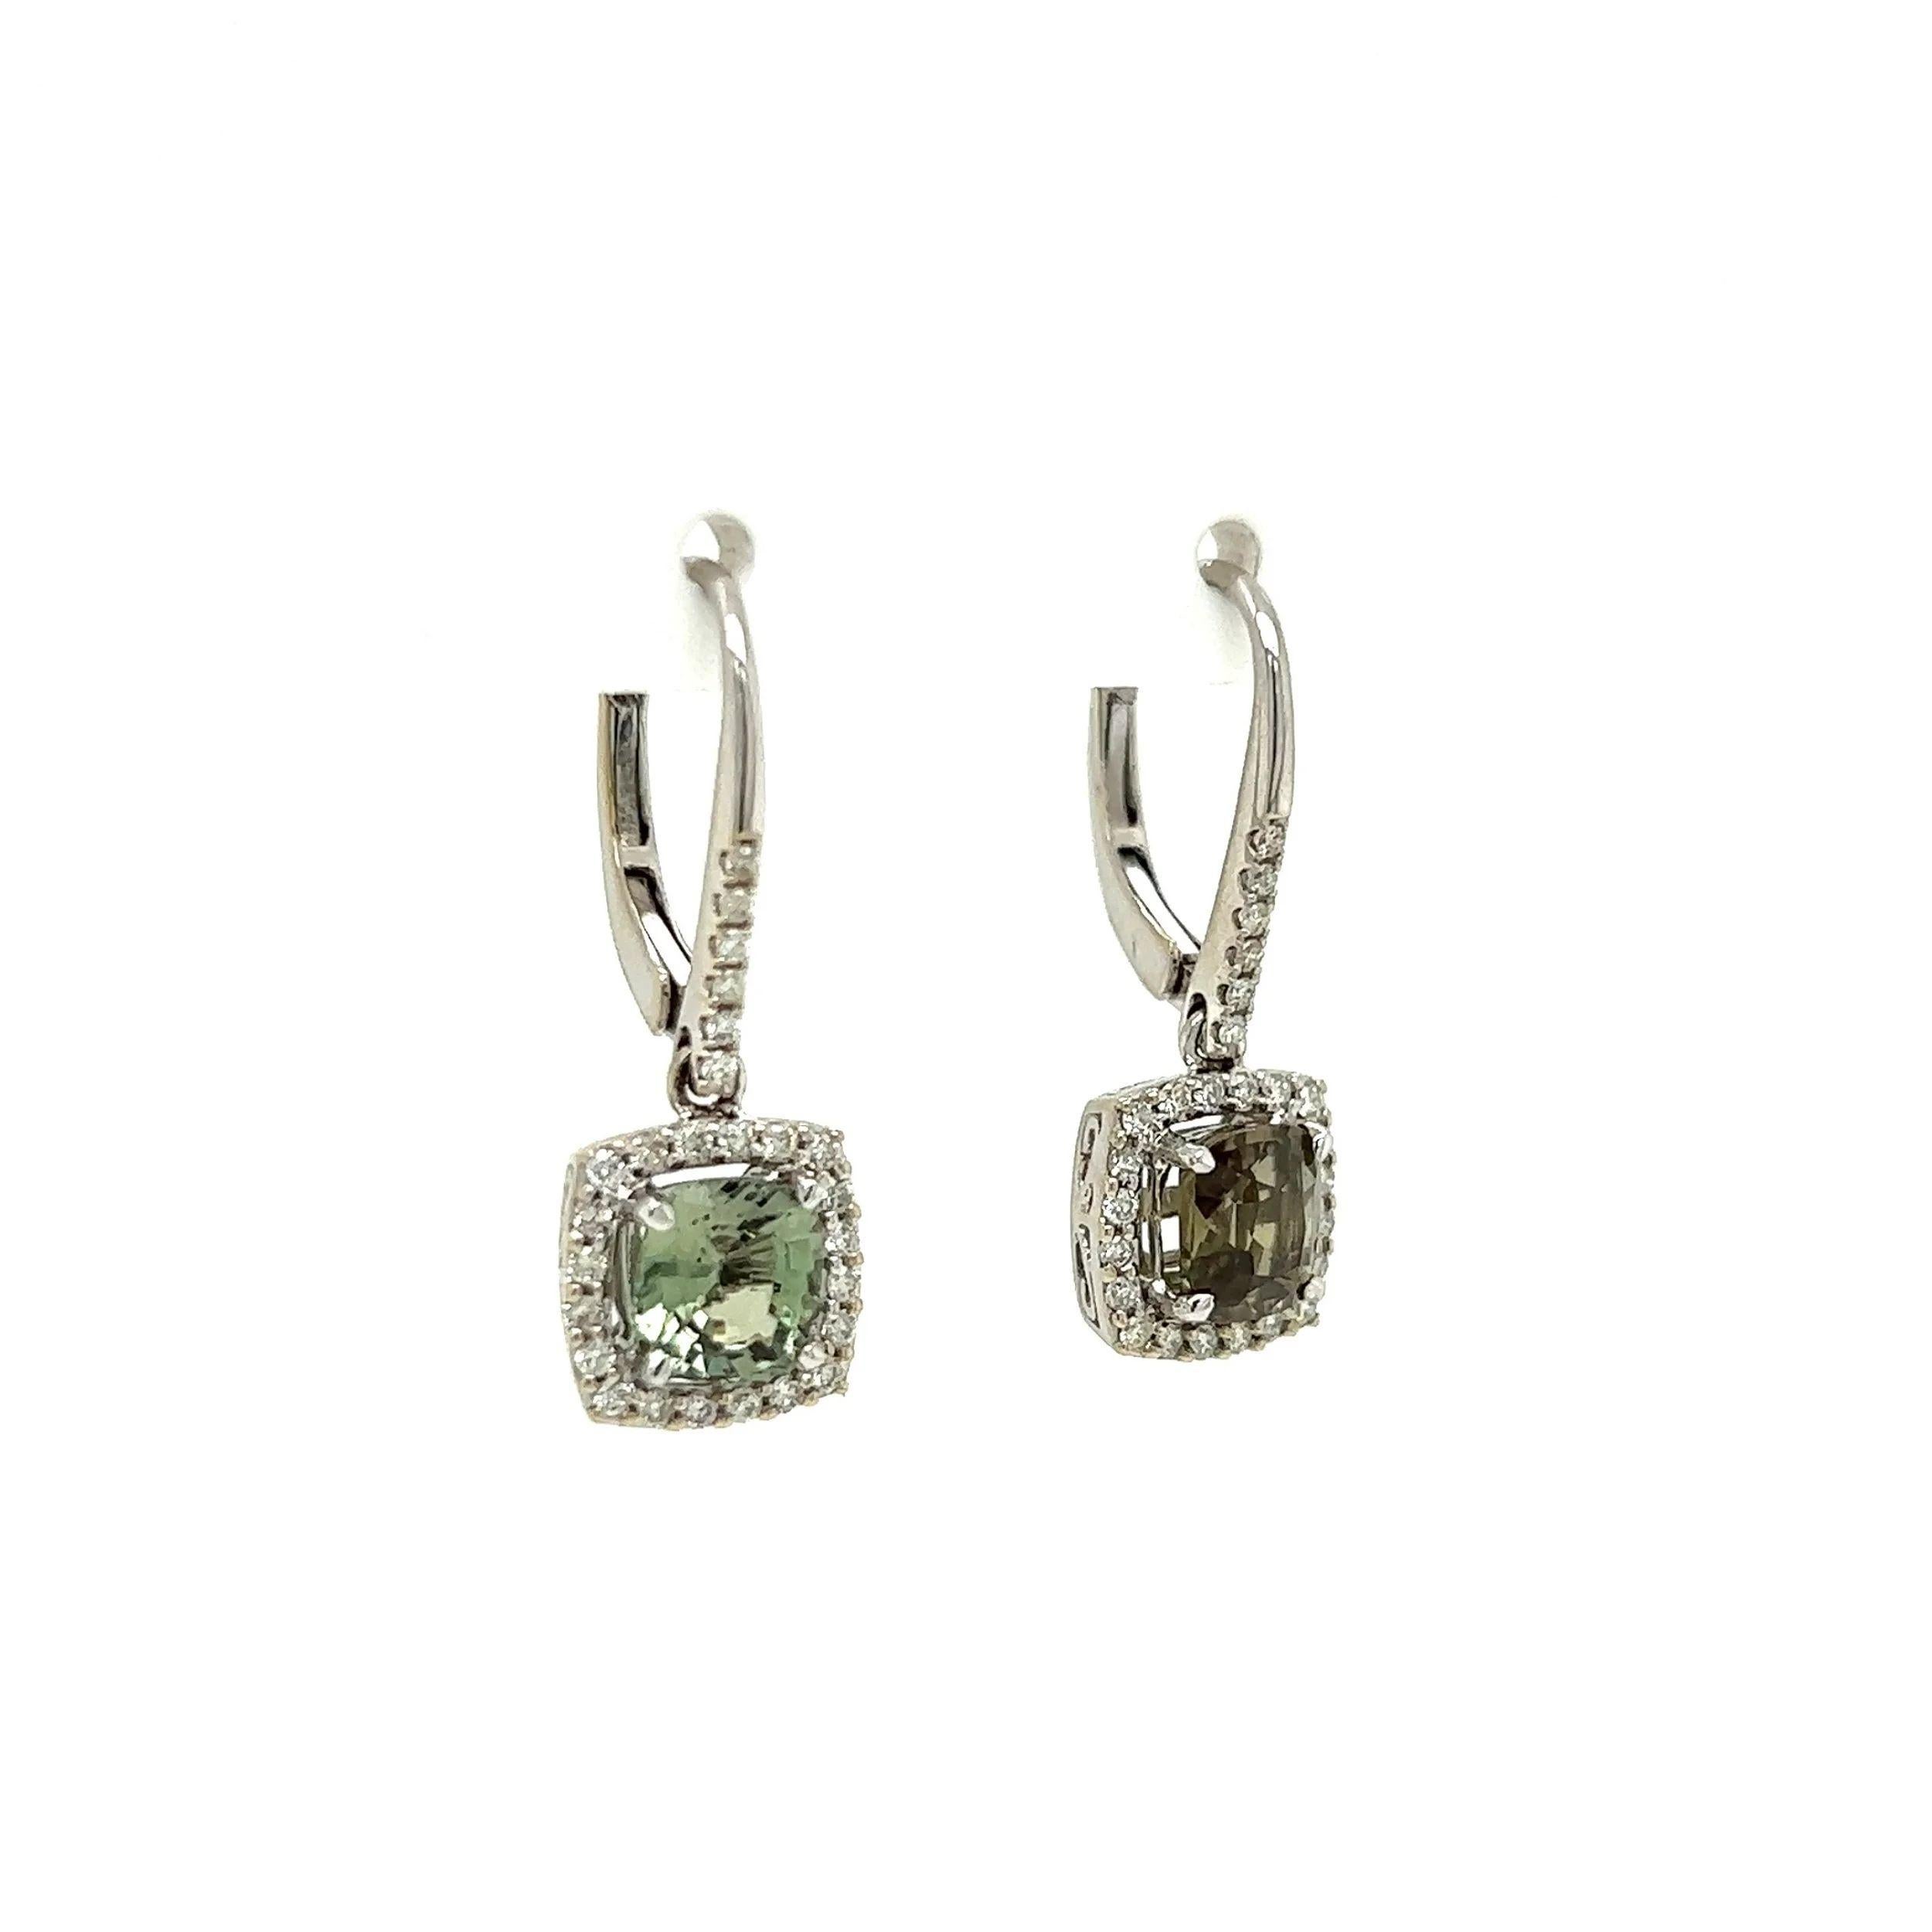 Simply Beautiful! Finely detailed Art Deco Revival Cushion Alexandrite and Diamond Platinum Halo Drop Earrings. Each earring Hand set with a Cushion Alexandrite Gemstone, weighing approx. 0.98ct & 1.05 Carat, 2.03tcw for both. Surrounded by